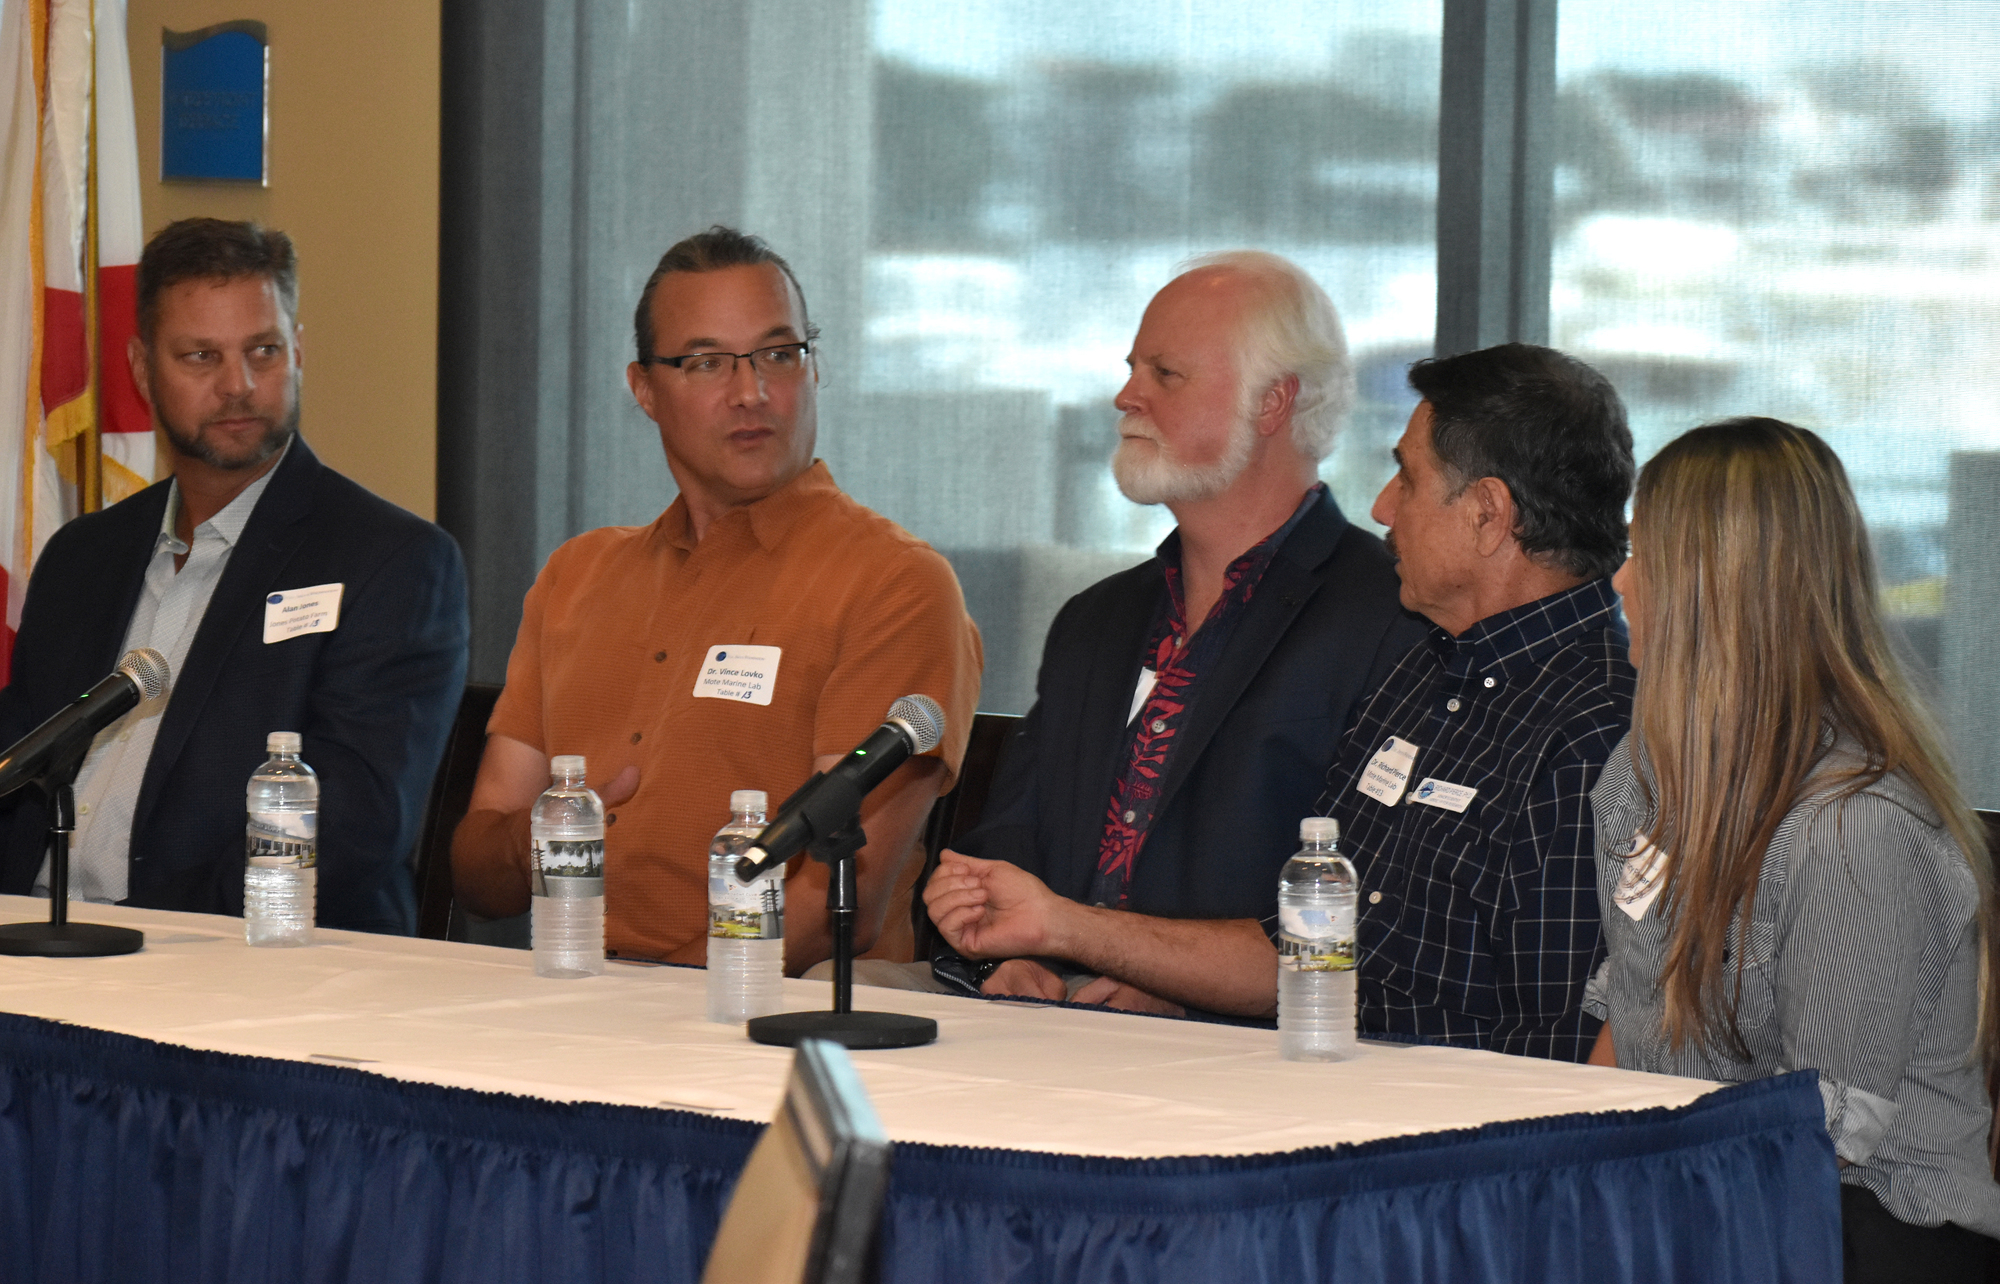 The panel addressed audience questions regarding red tide and what can be done to help.